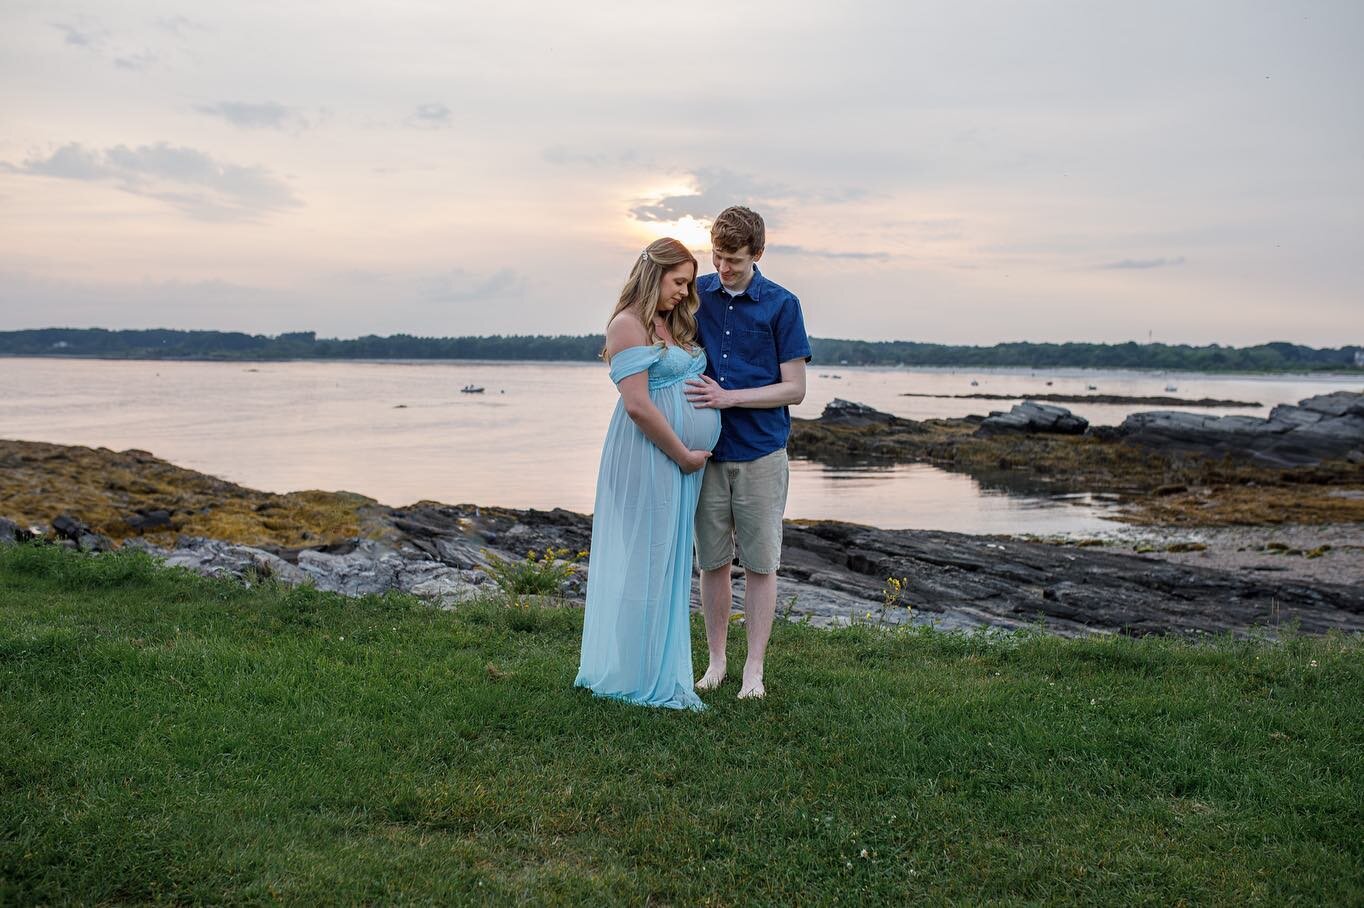 I was so happy to capture this maternity session for my beautiful friends! Their little boy will be here in September, and I am so excited to meet him!